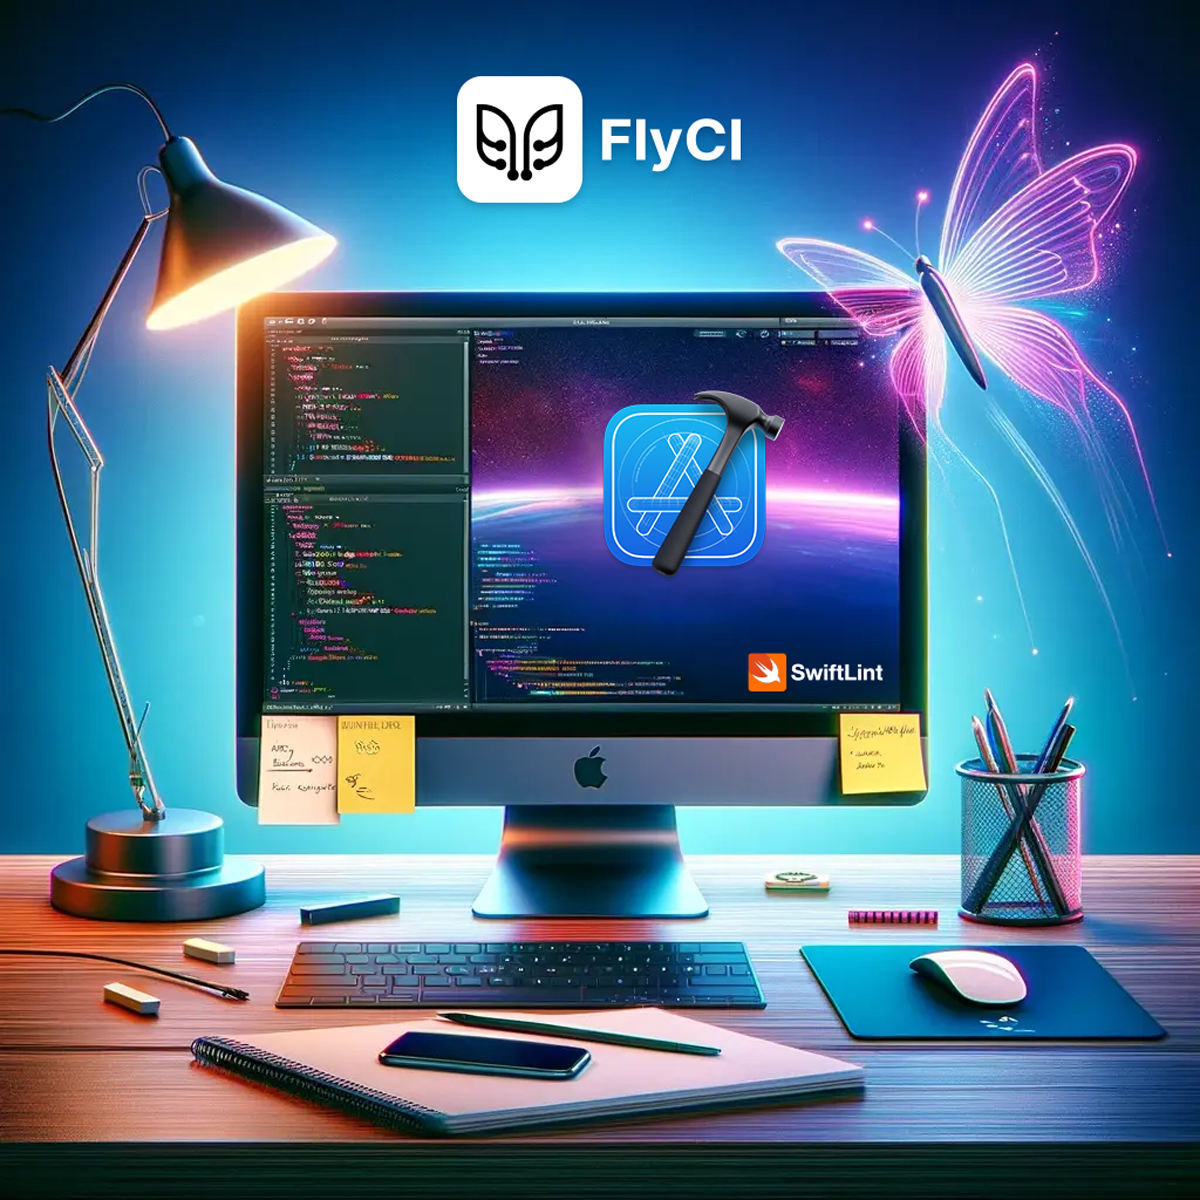 The FlyCI logo along with Xcode and SwiftLint logos visualized on a Desktop Mac.